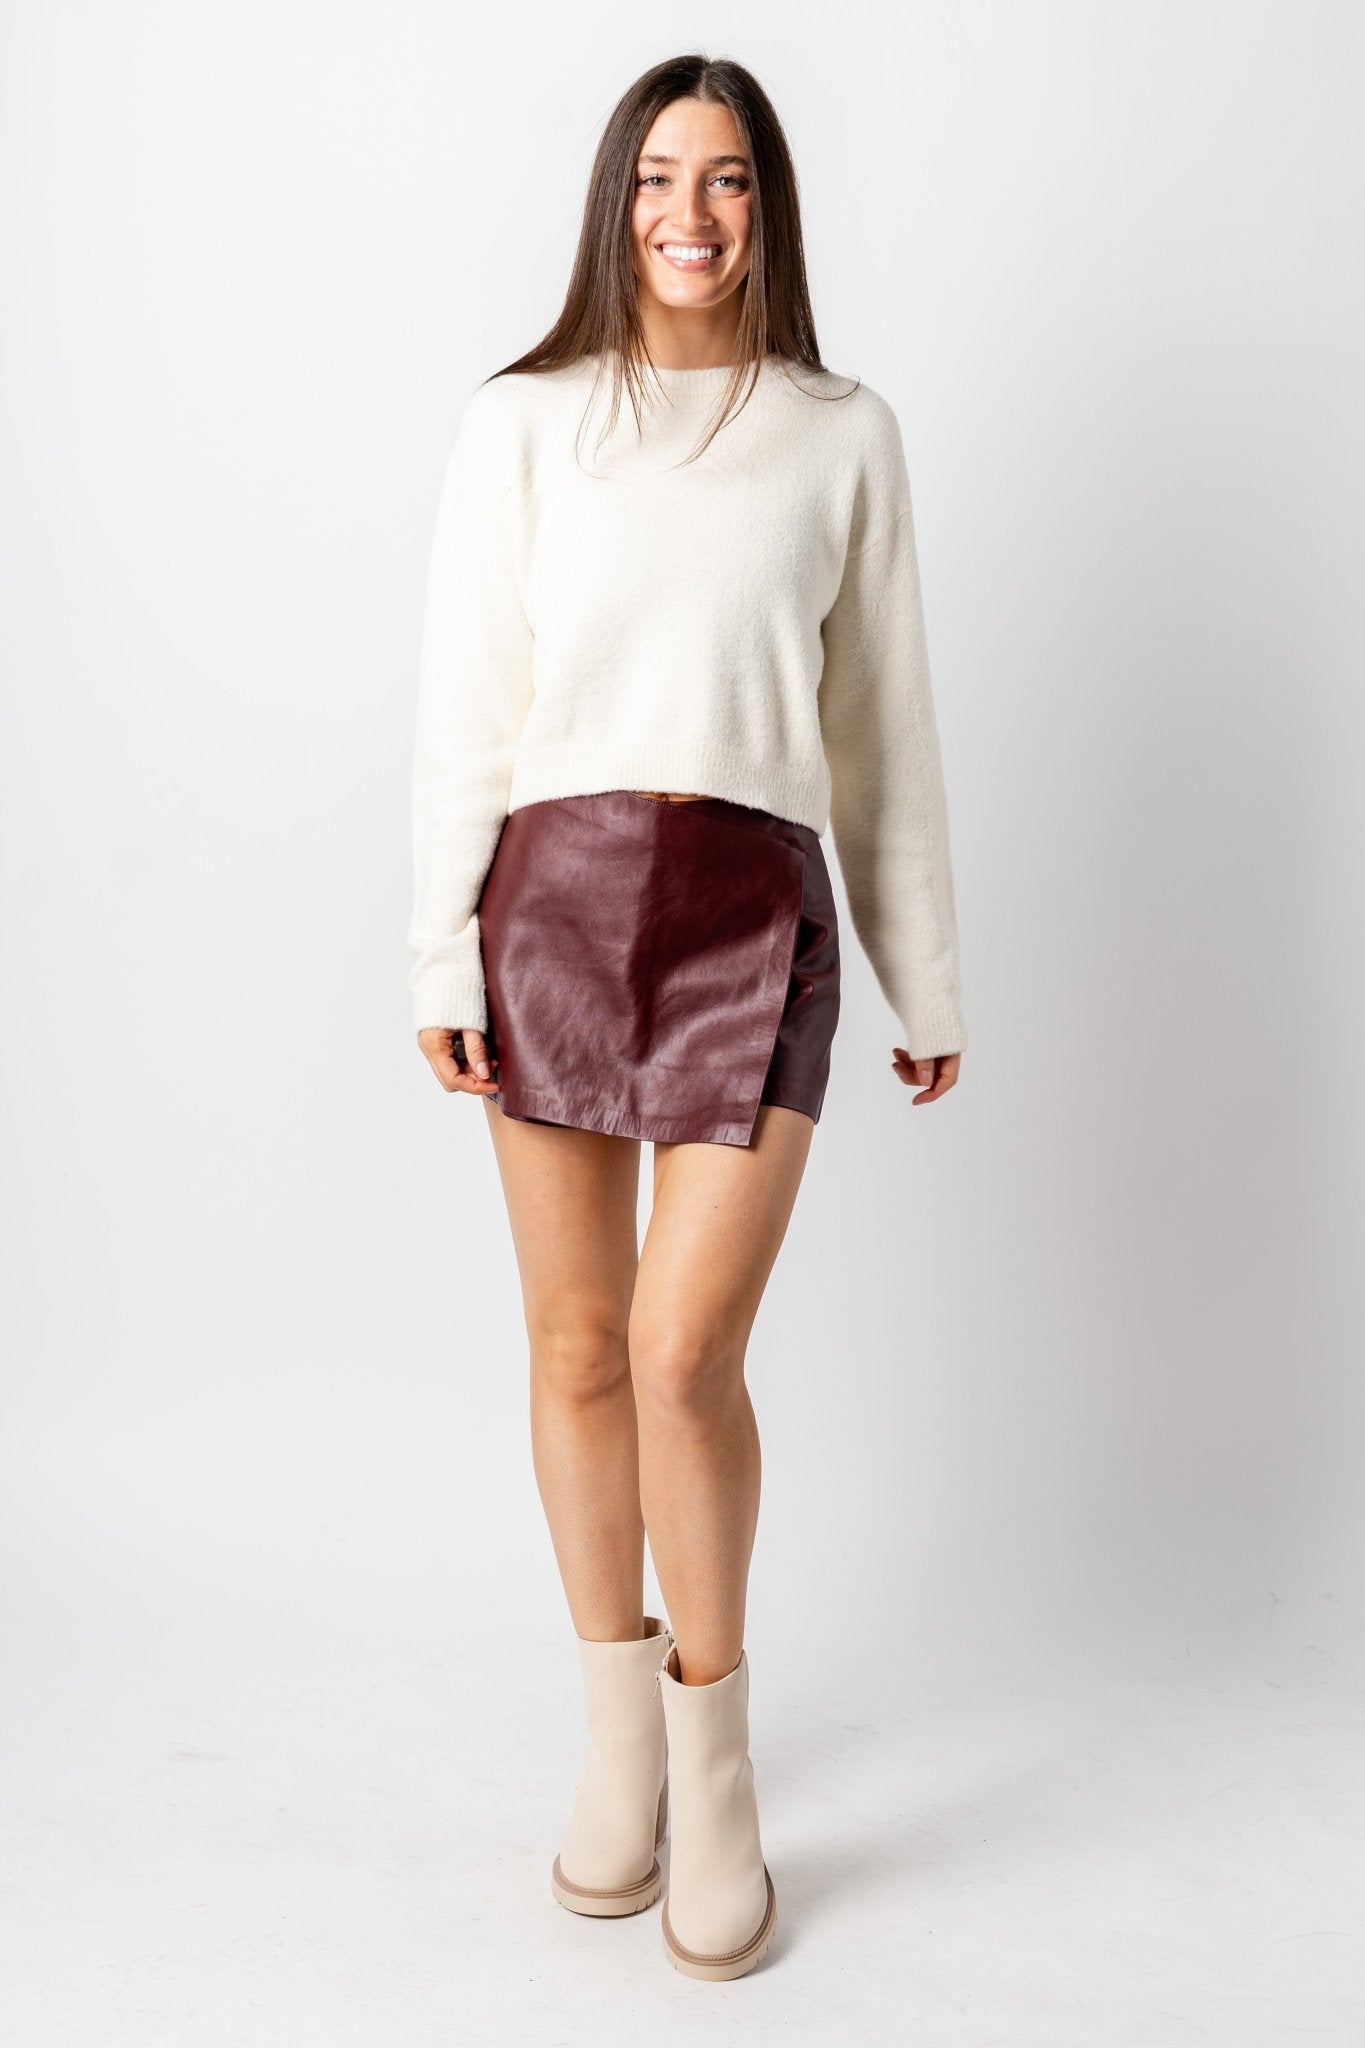 Faux leather skort red wine - Exclusive Collection of Holiday Inspired T-Shirts and Hoodies at Lush Fashion Lounge Boutique in Oklahoma City